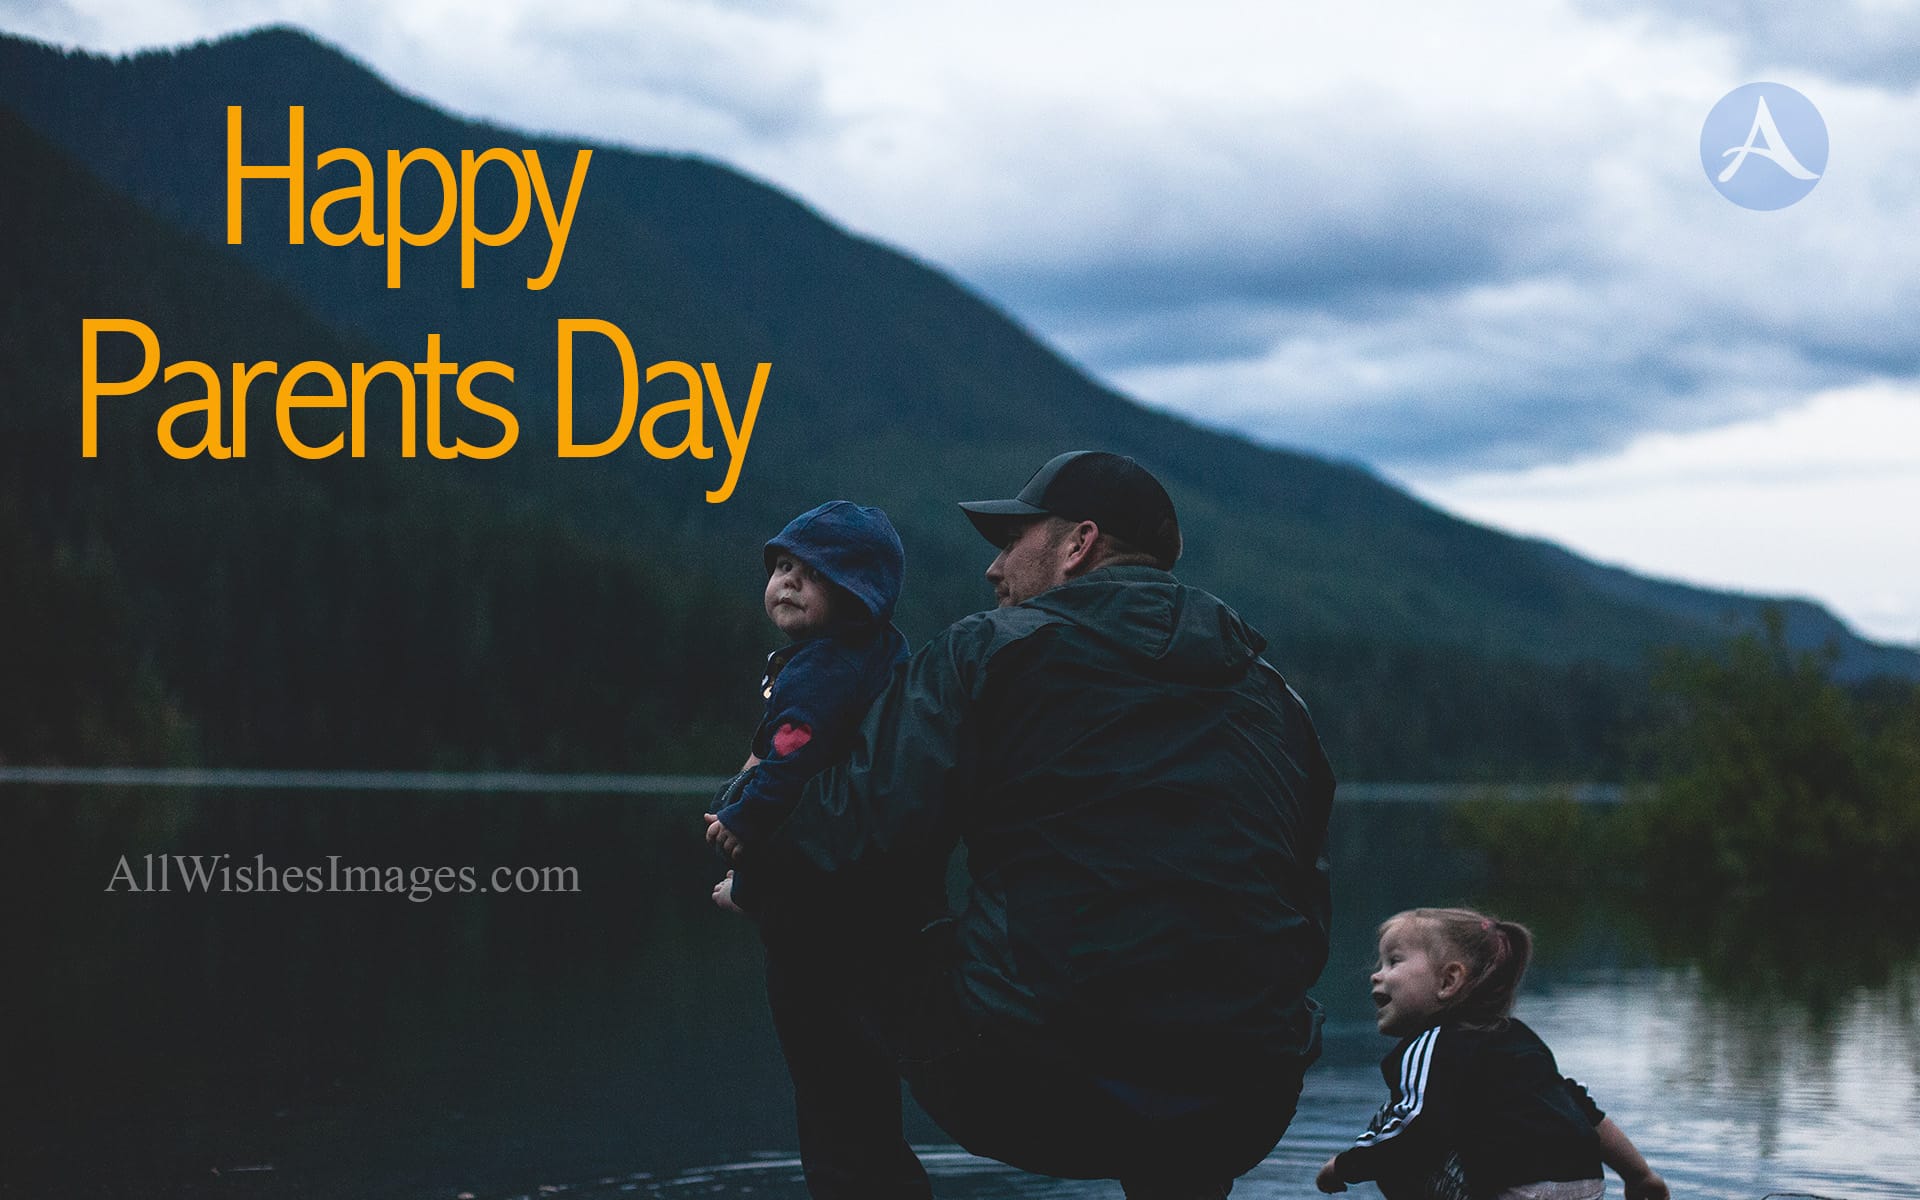 Parents Day Wishes Images 2022 - Happy Parents Day Greetings - All Wishes  Images - Images for WhatsApp